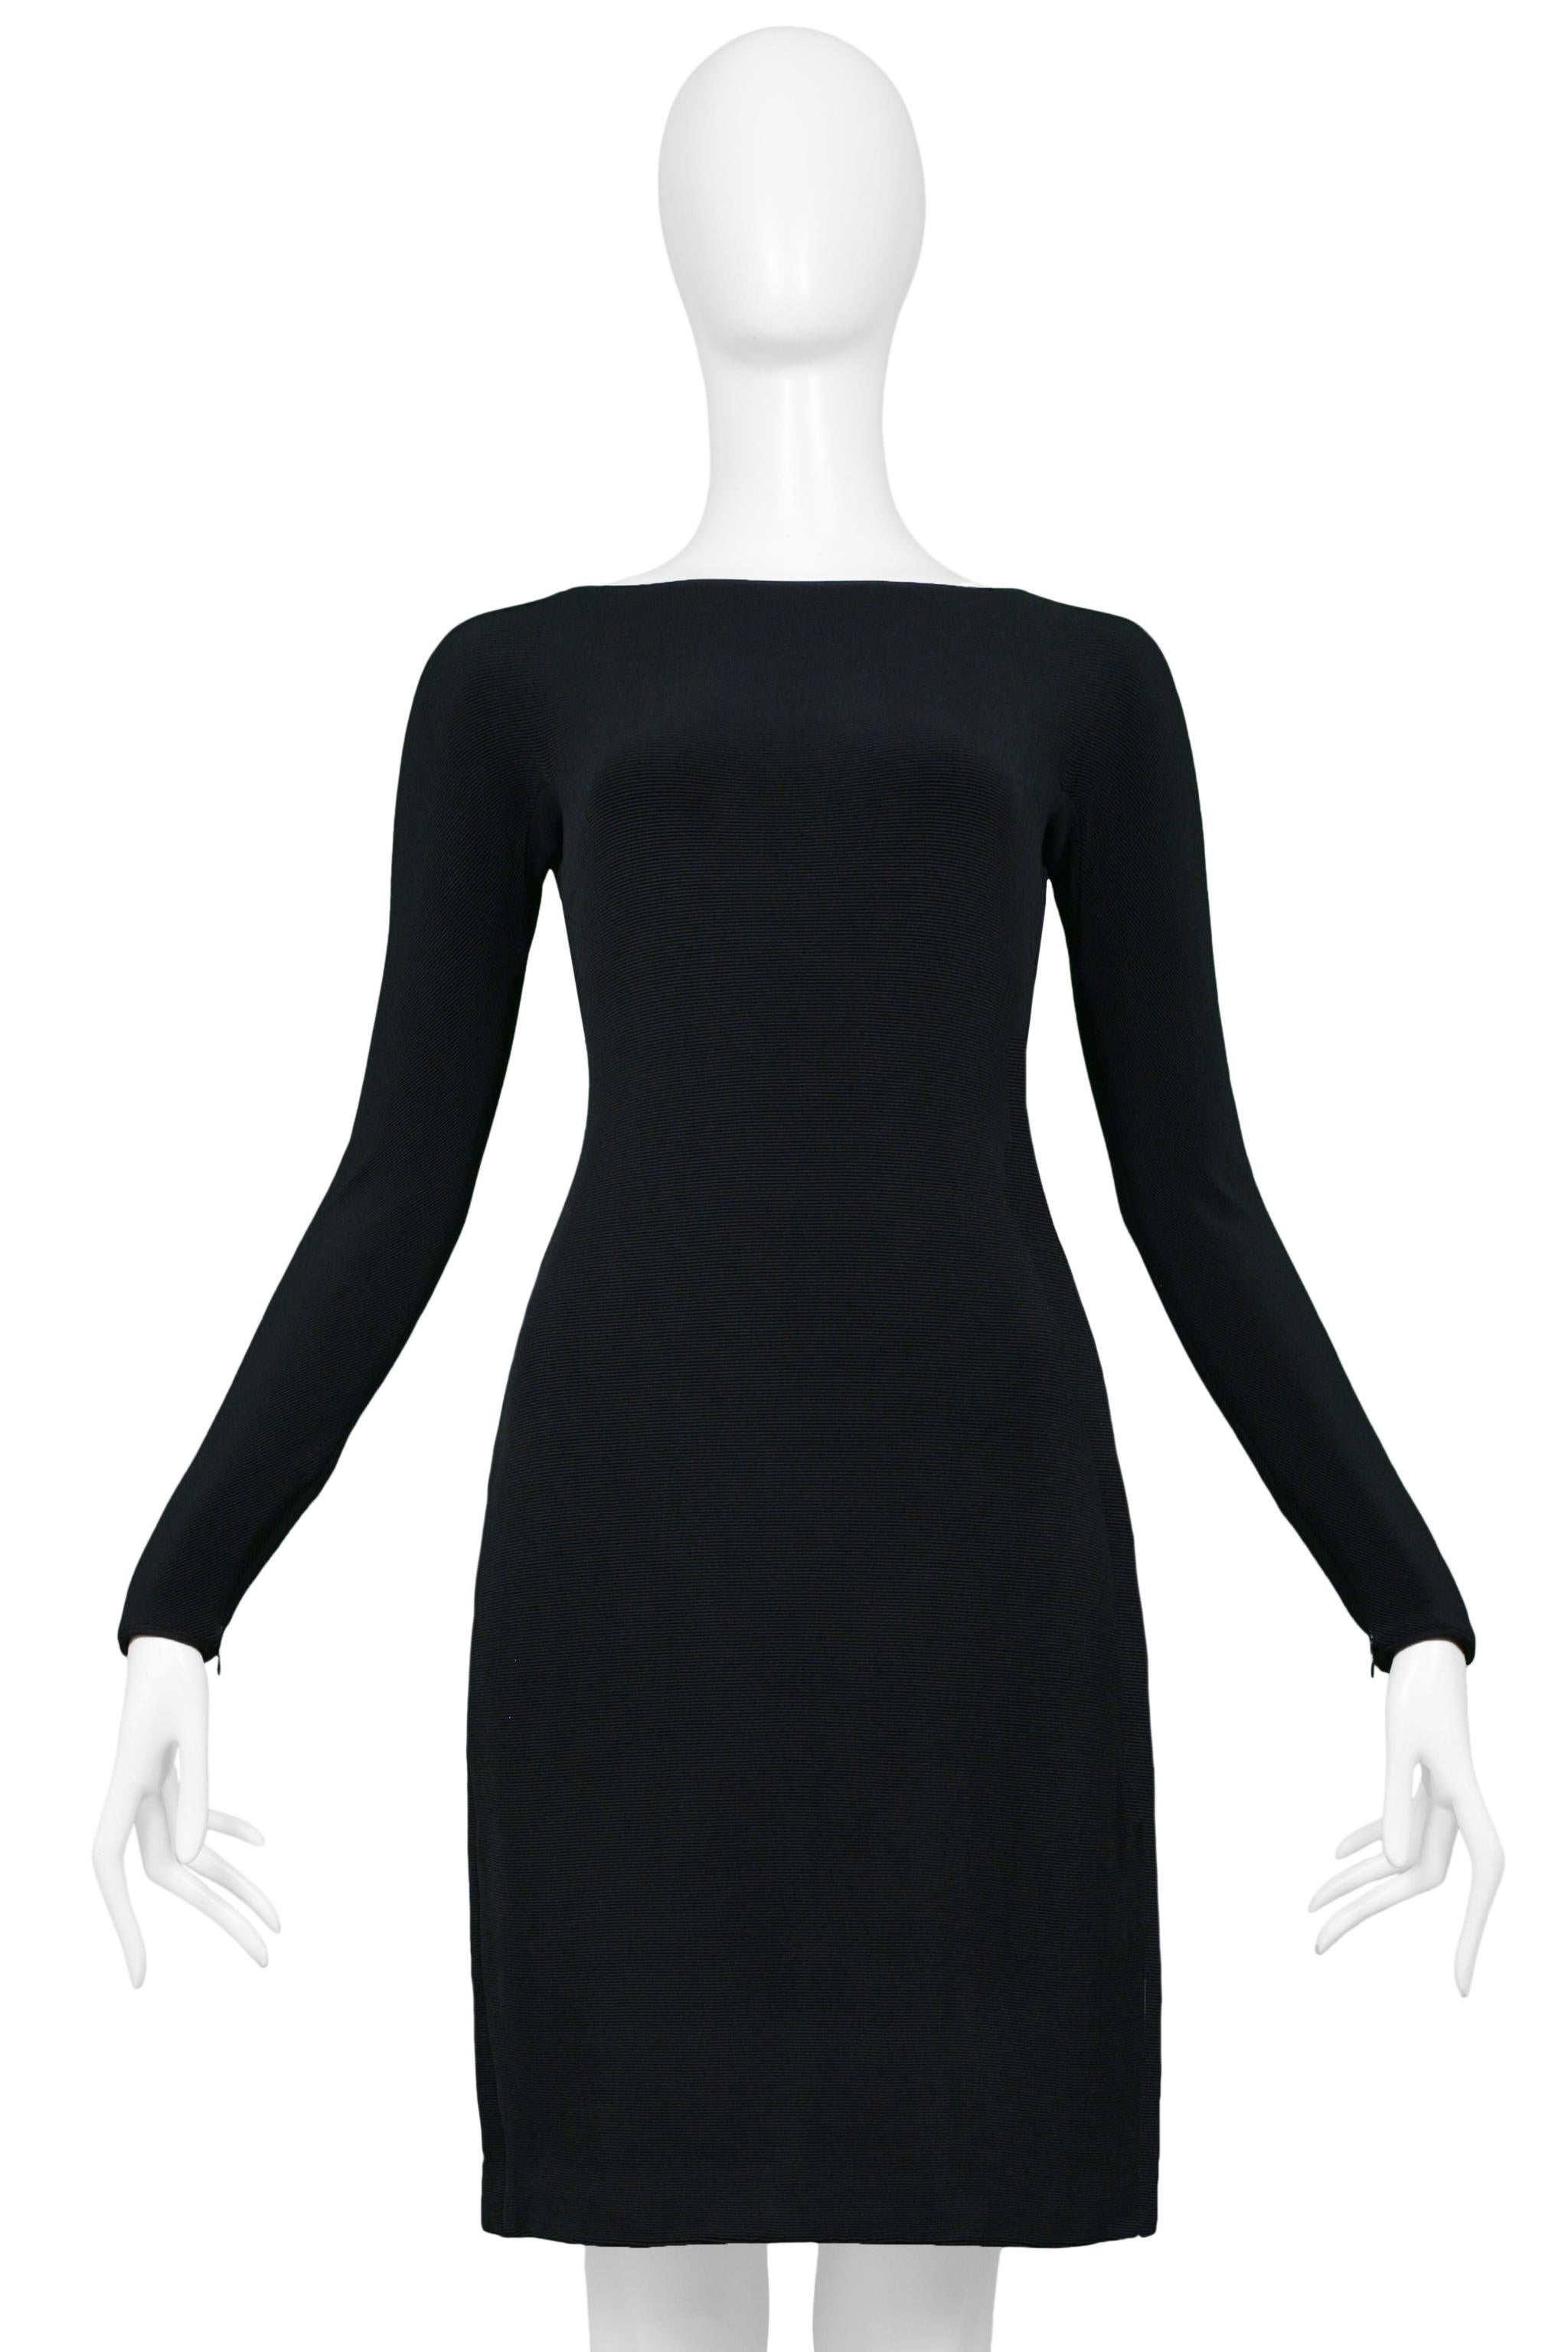 Versace Black Mini Cocktail Dress With Cutout Back In Excellent Condition For Sale In Los Angeles, CA